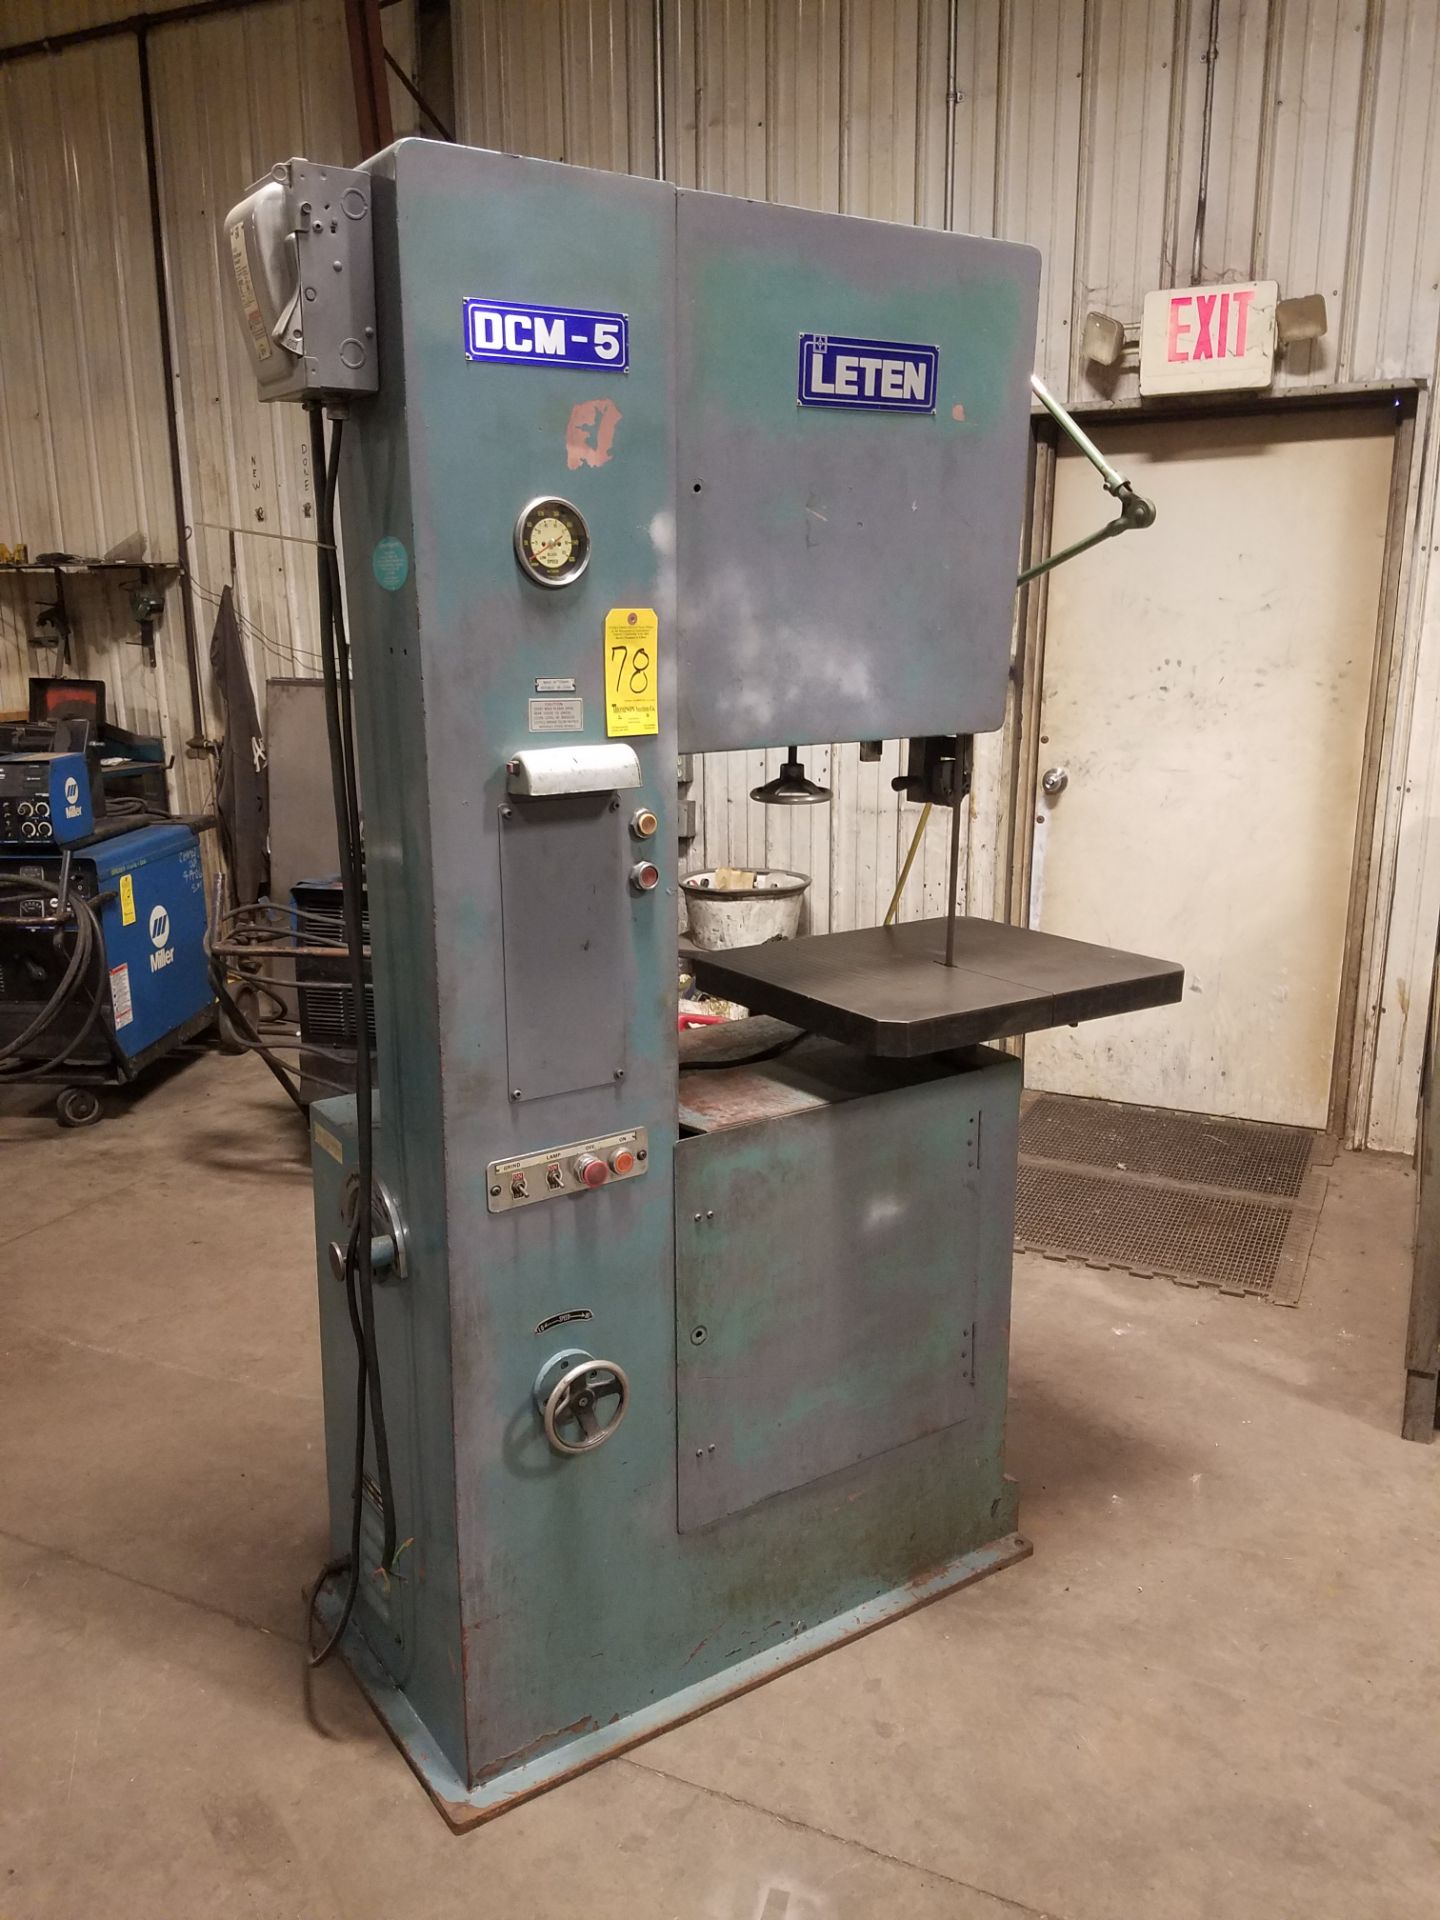 Leten Model DCM-5 Vertical Band Saw, 20 Inch Capacity, Loading Fee $50.00 - Image 2 of 2